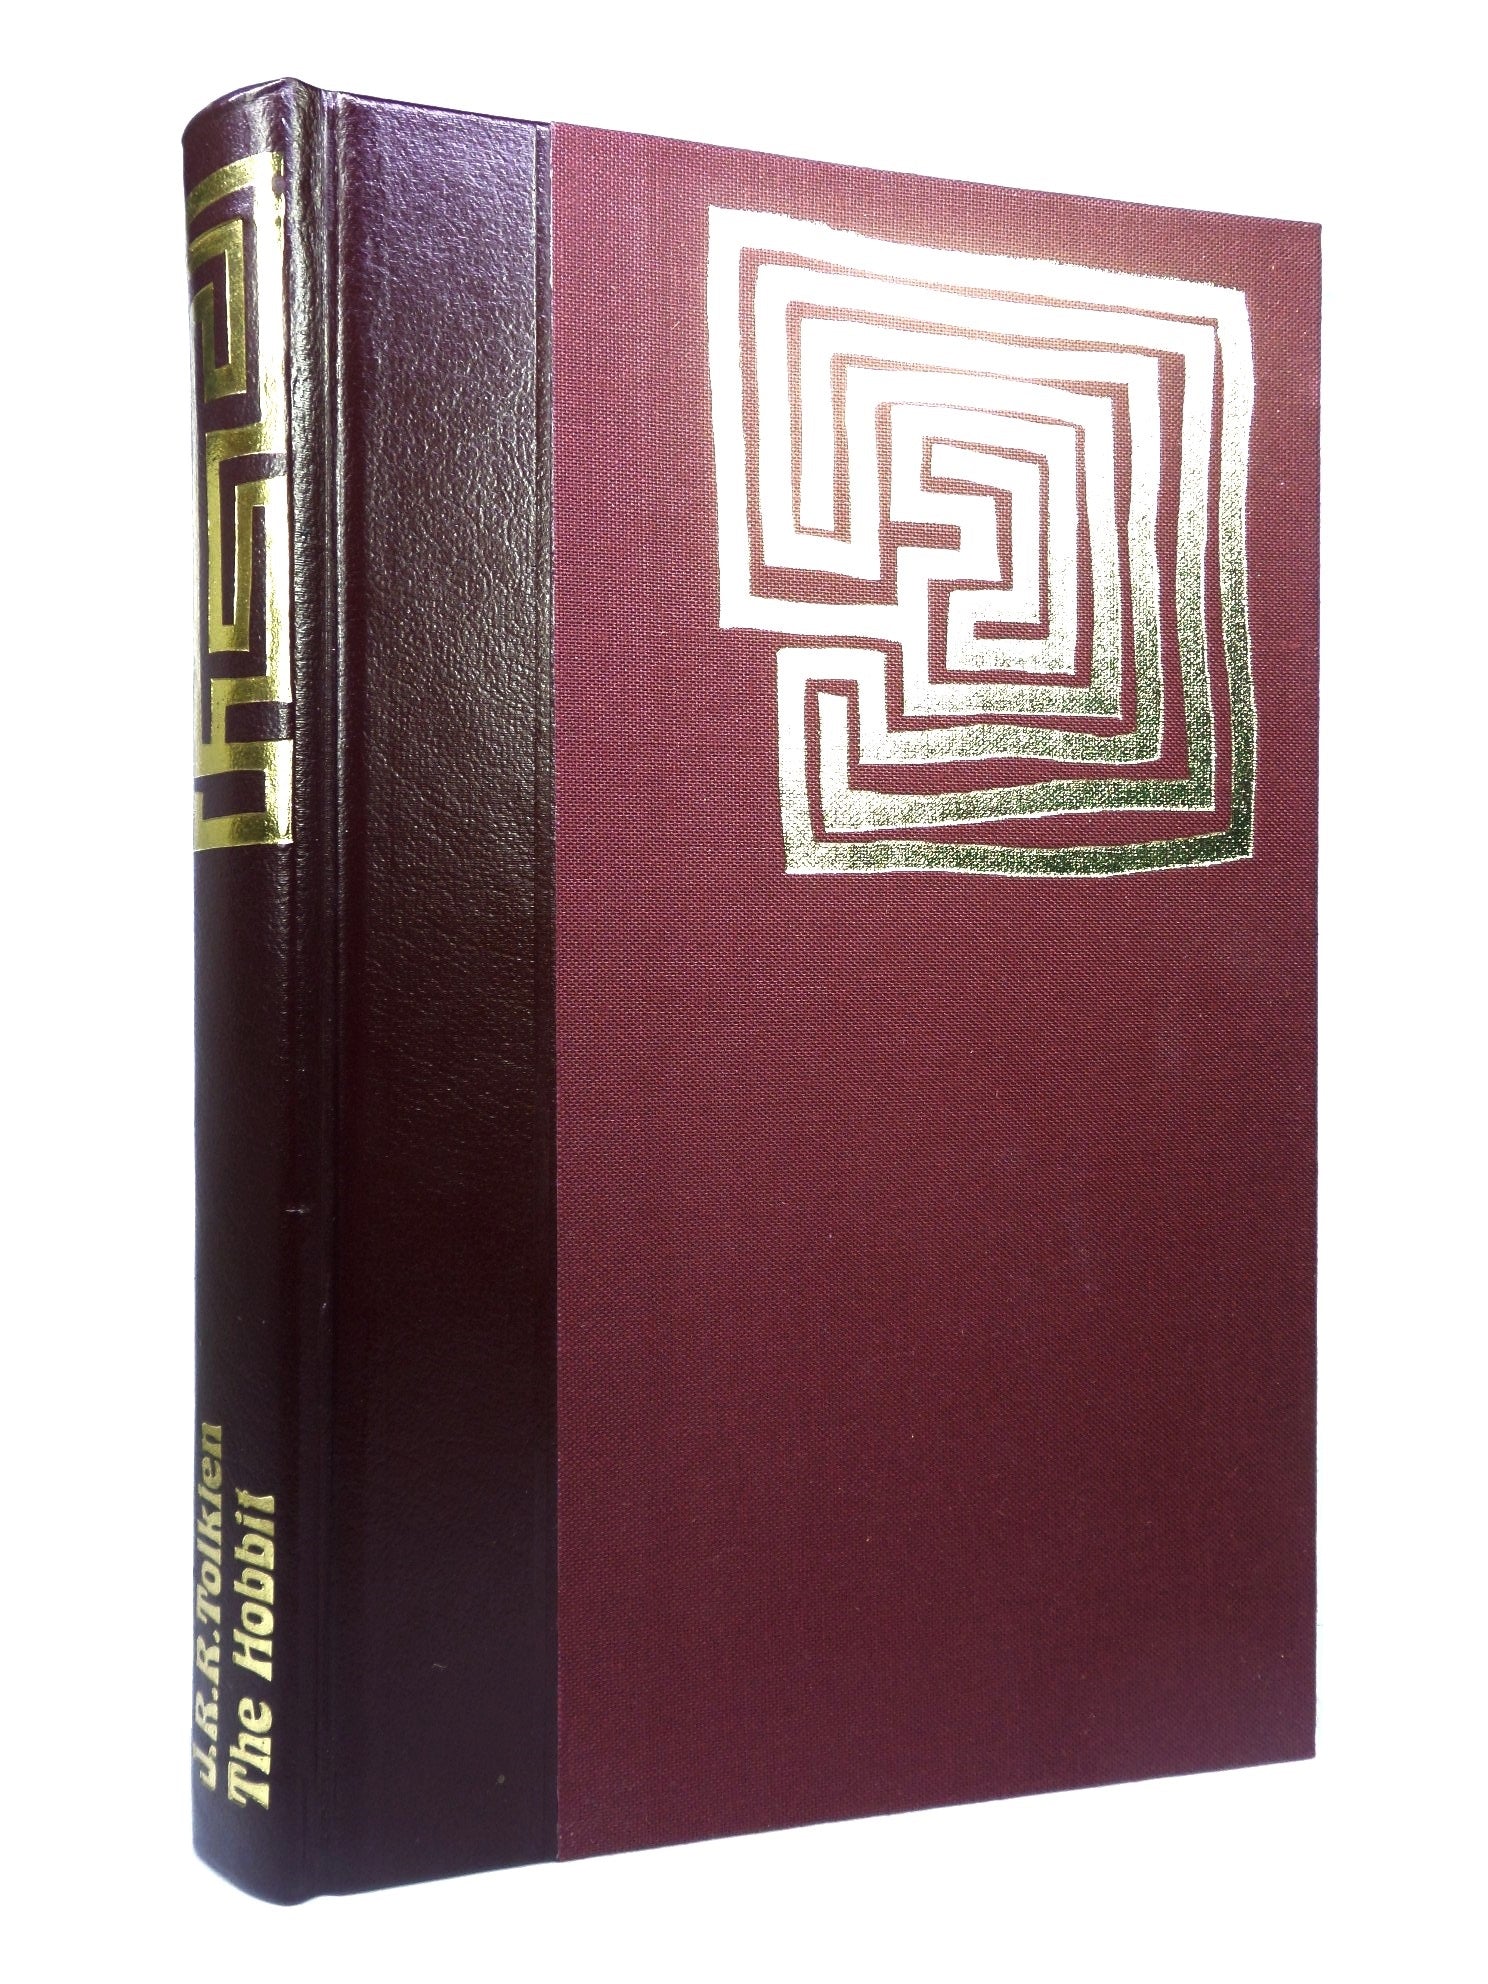 THE HOBBIT BY J.R.R. TOLKIEN 1979 FIRST FOLIO SOCIETY EDITION